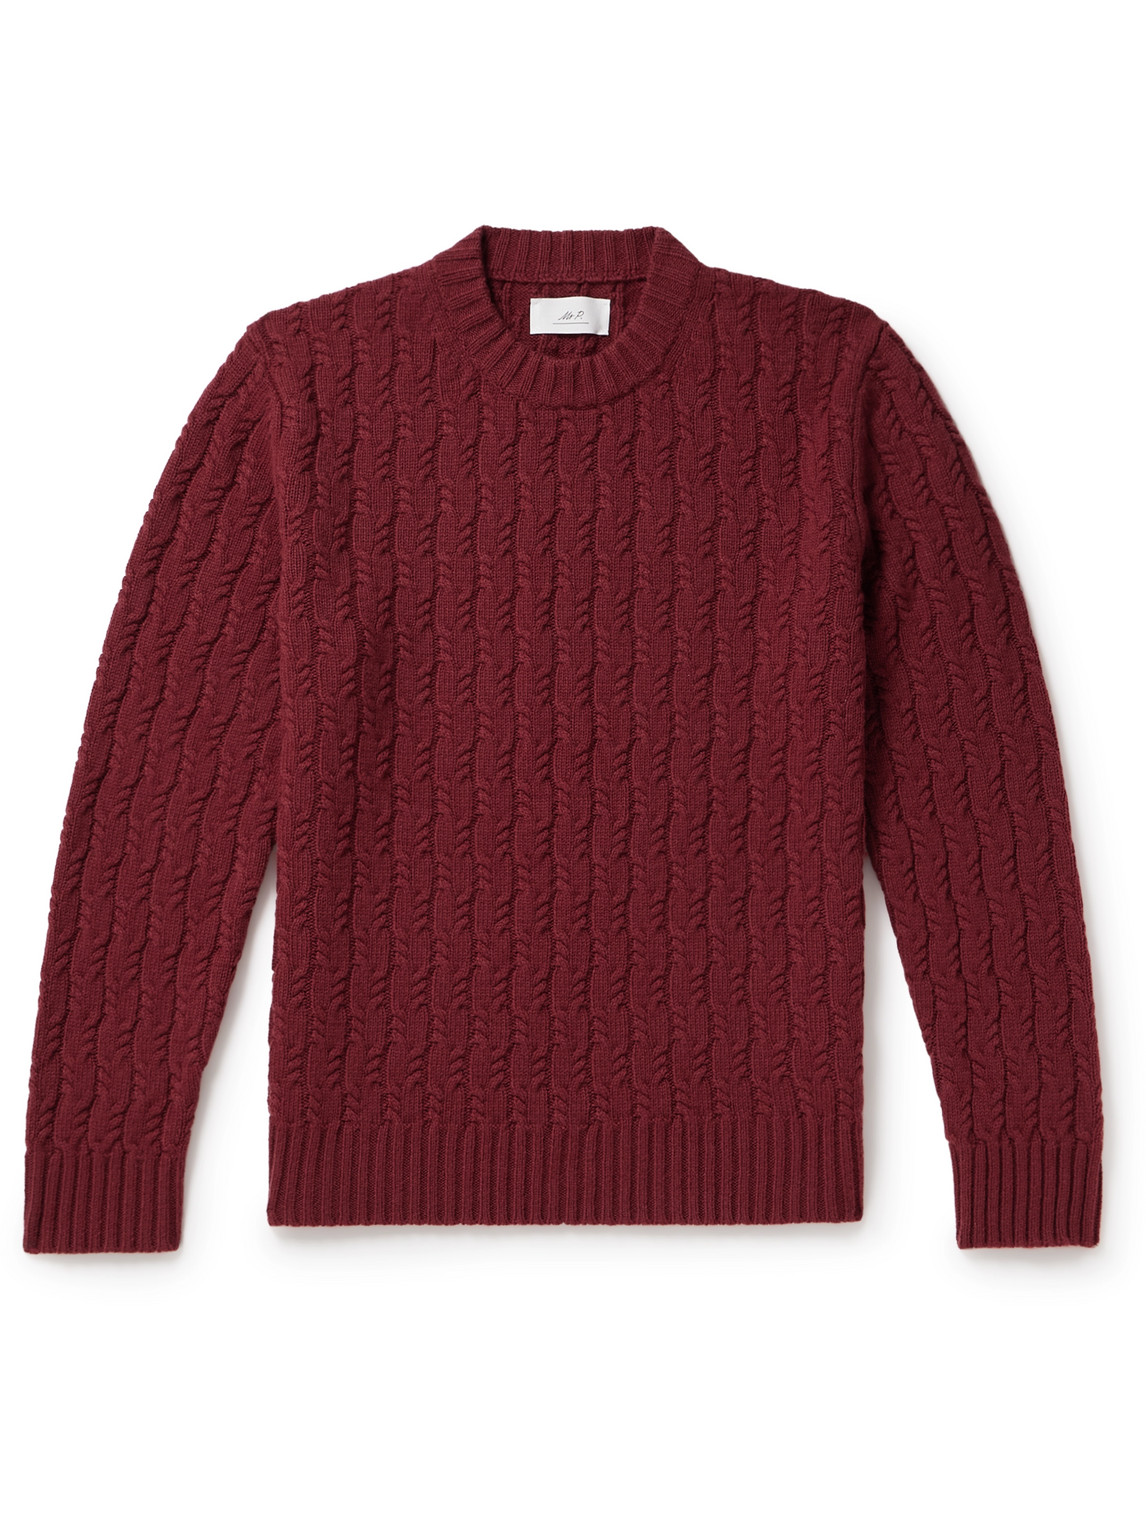 Mr P Cable-knit Wool Jumper In Burgundy